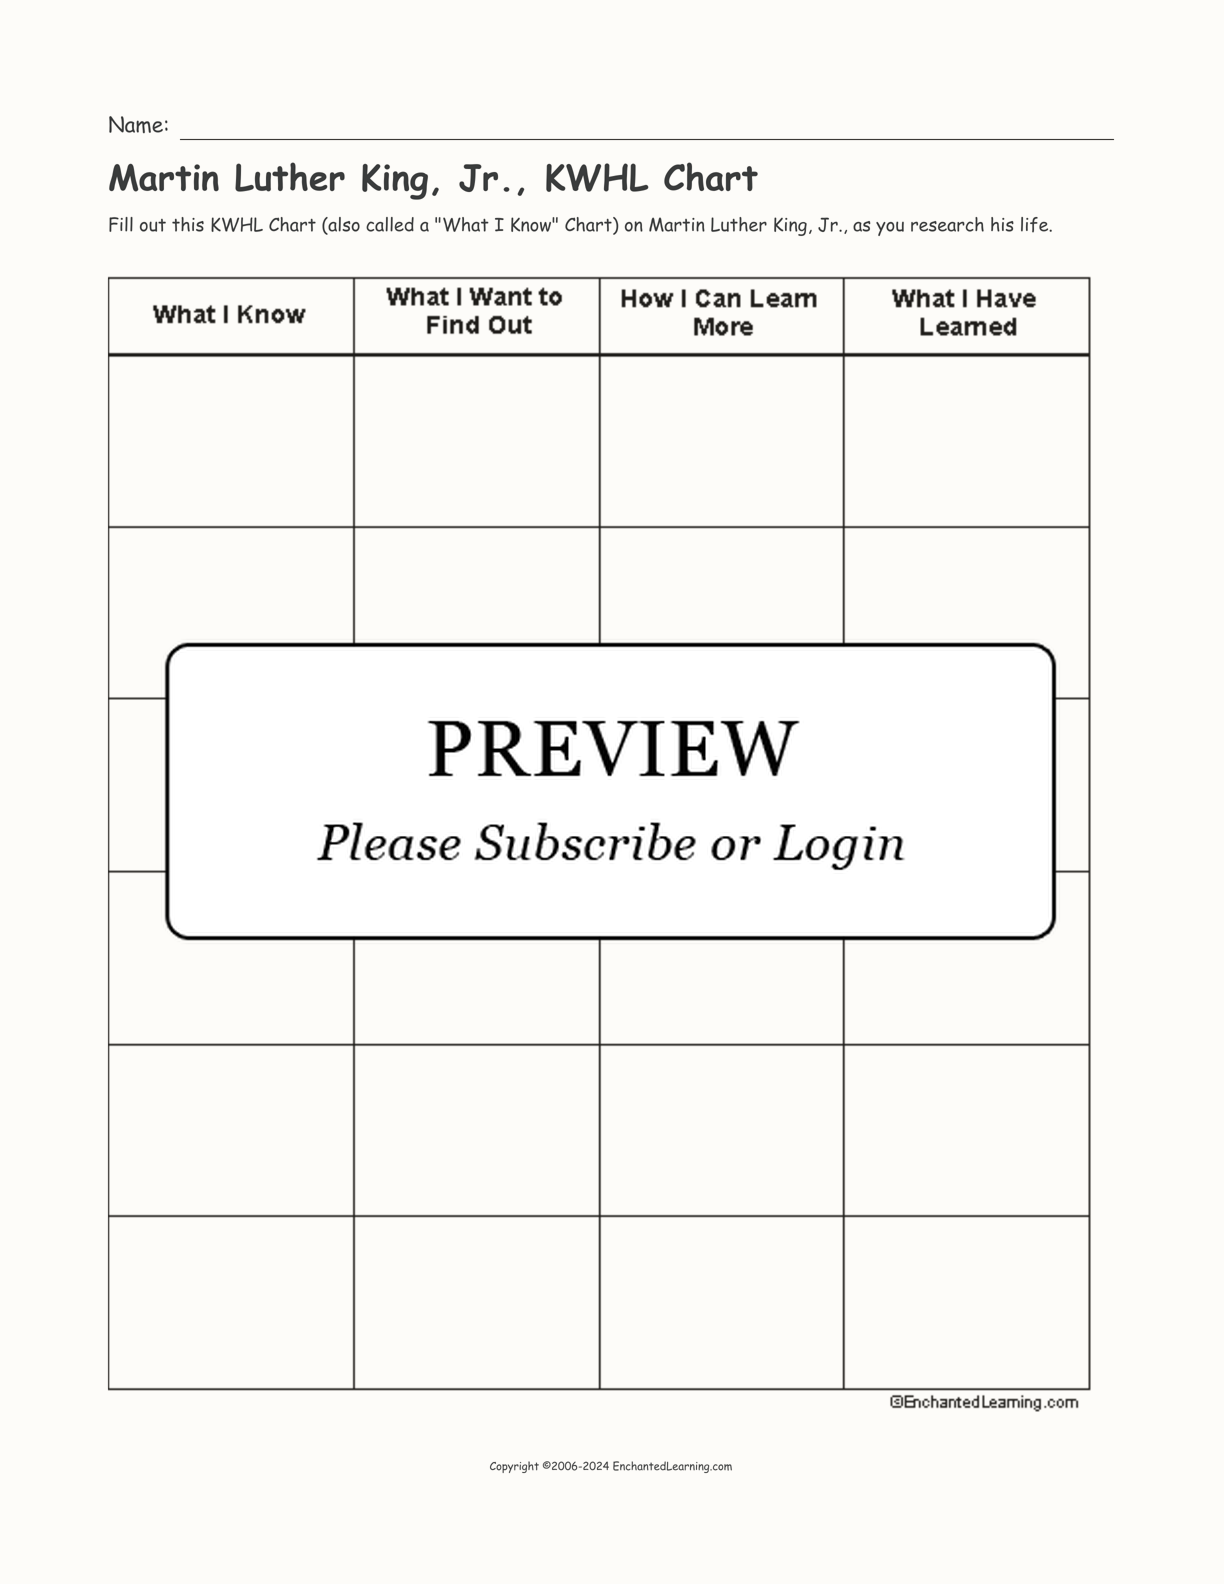 Martin Luther King, Jr., KWHL Chart interactive printout page 1